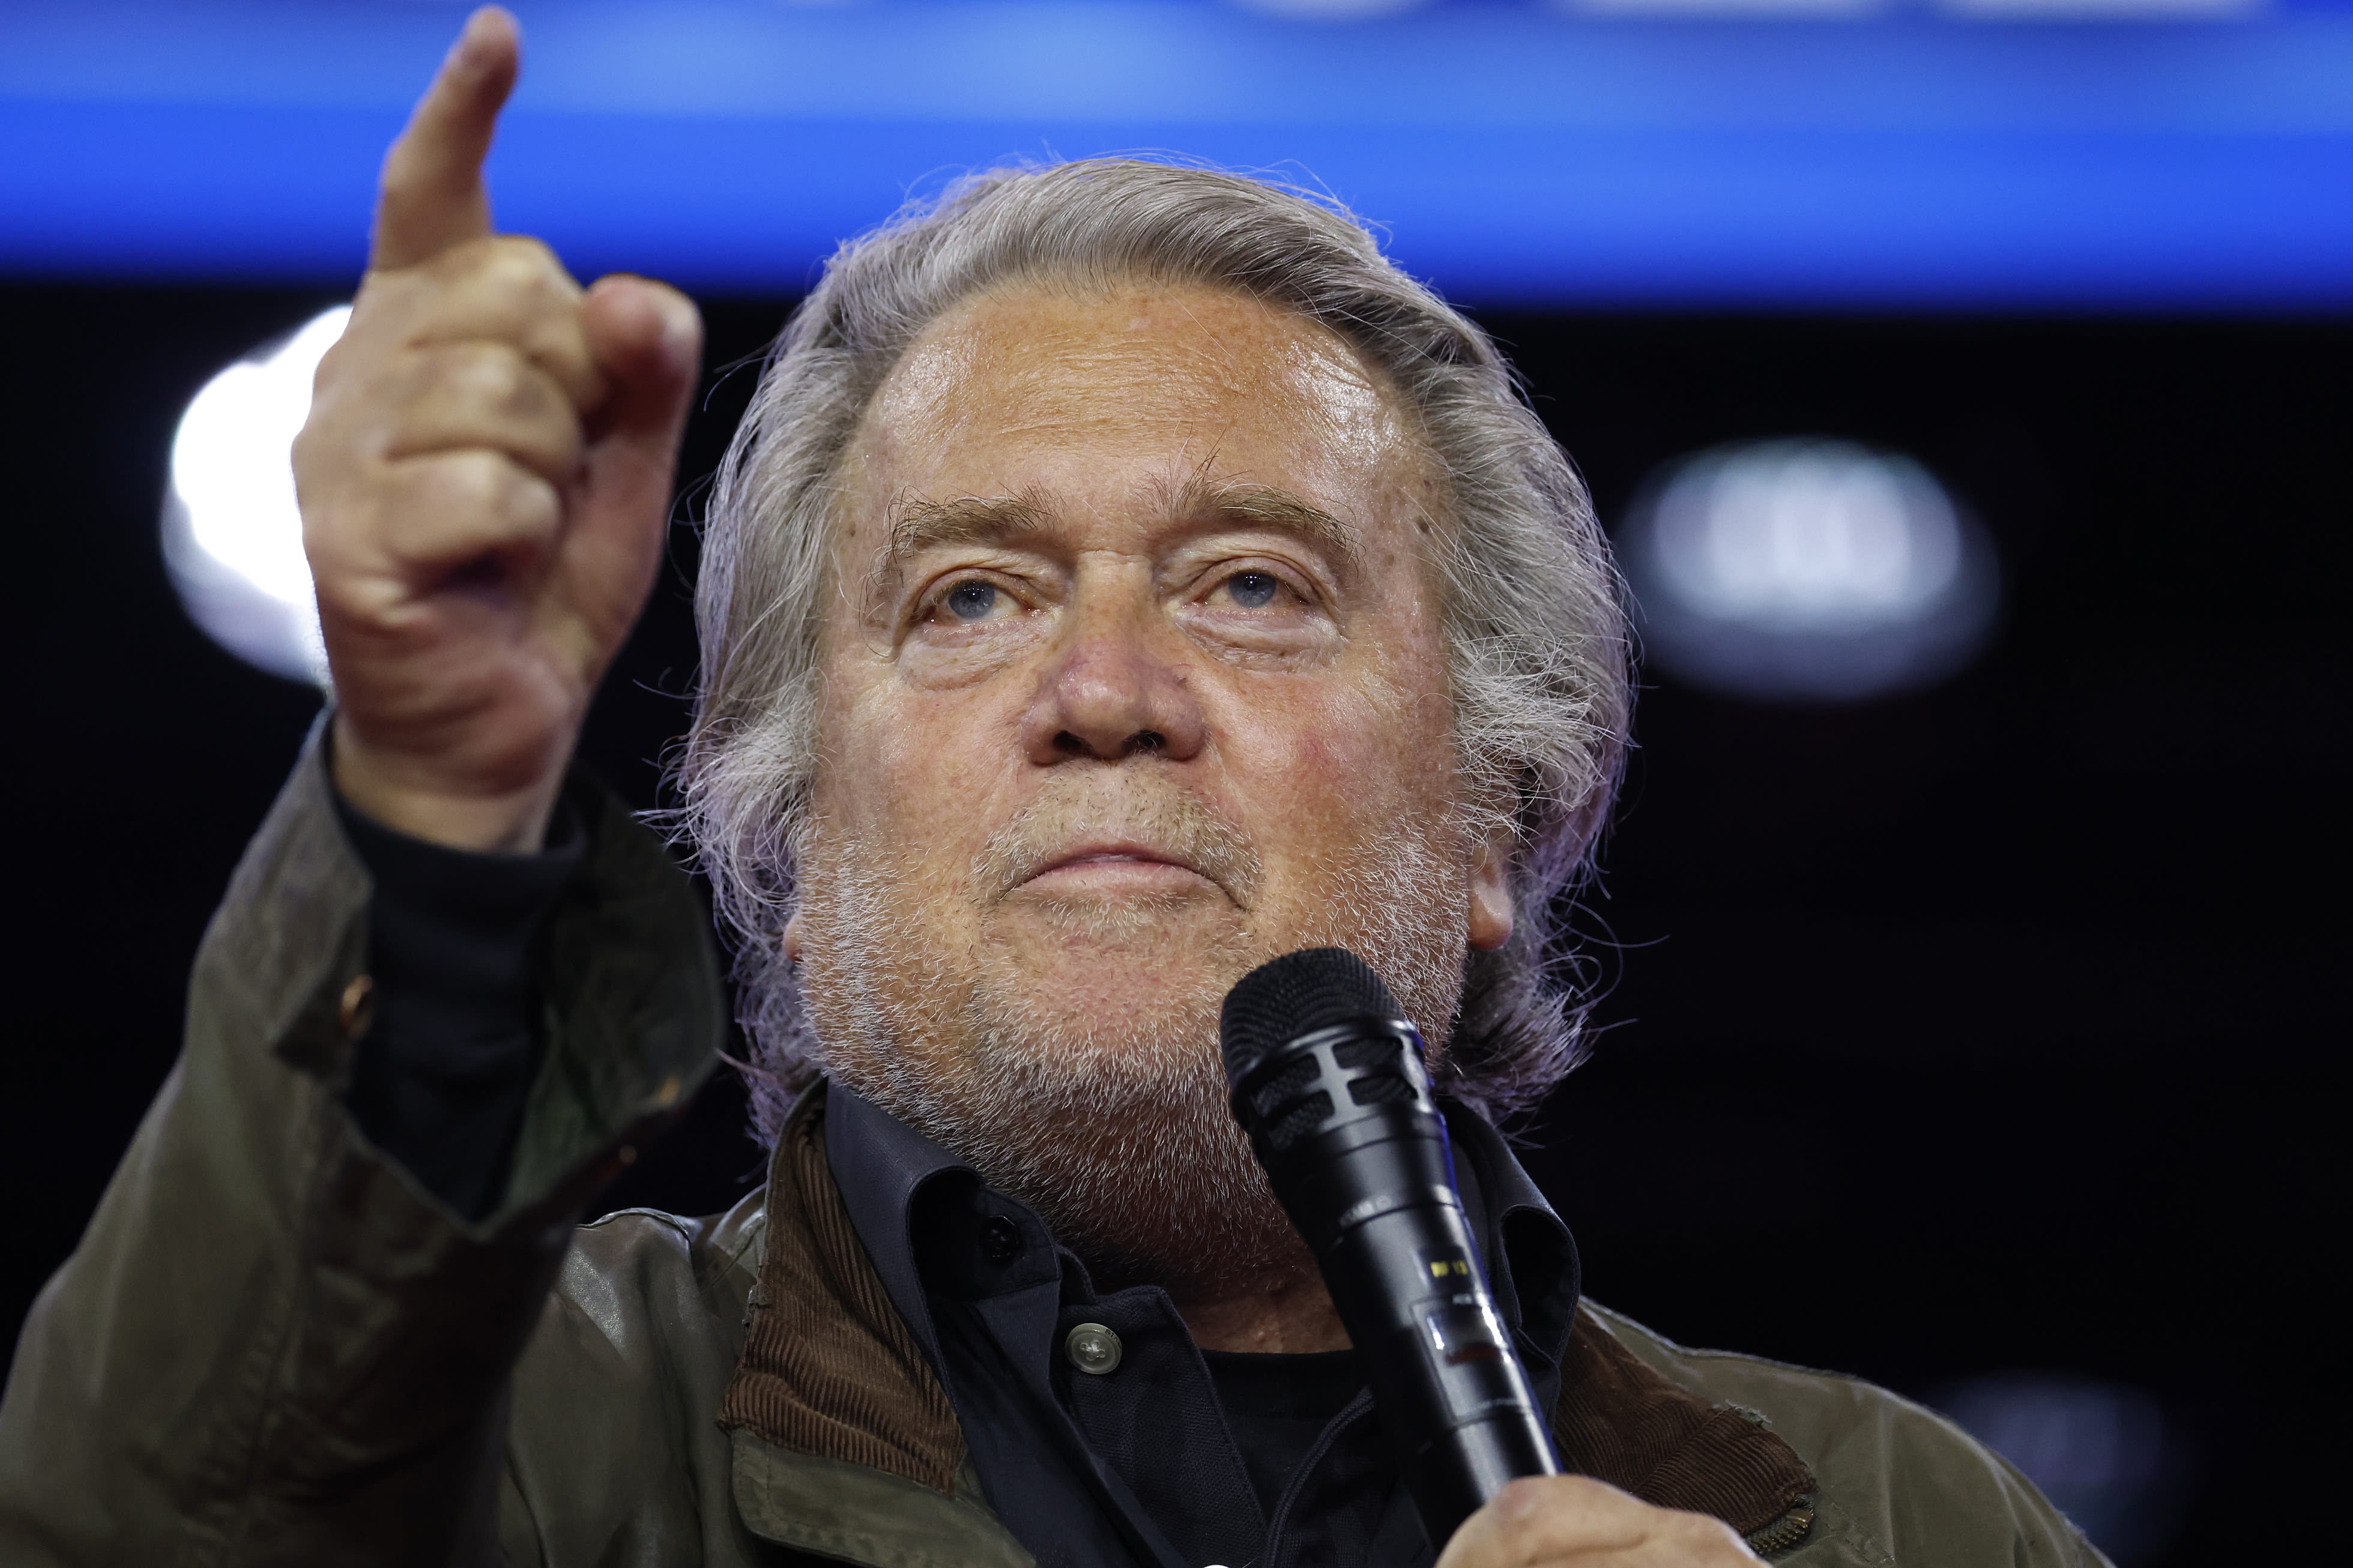 Steve Bannon issues MAGA battle cry: "Victory or death"